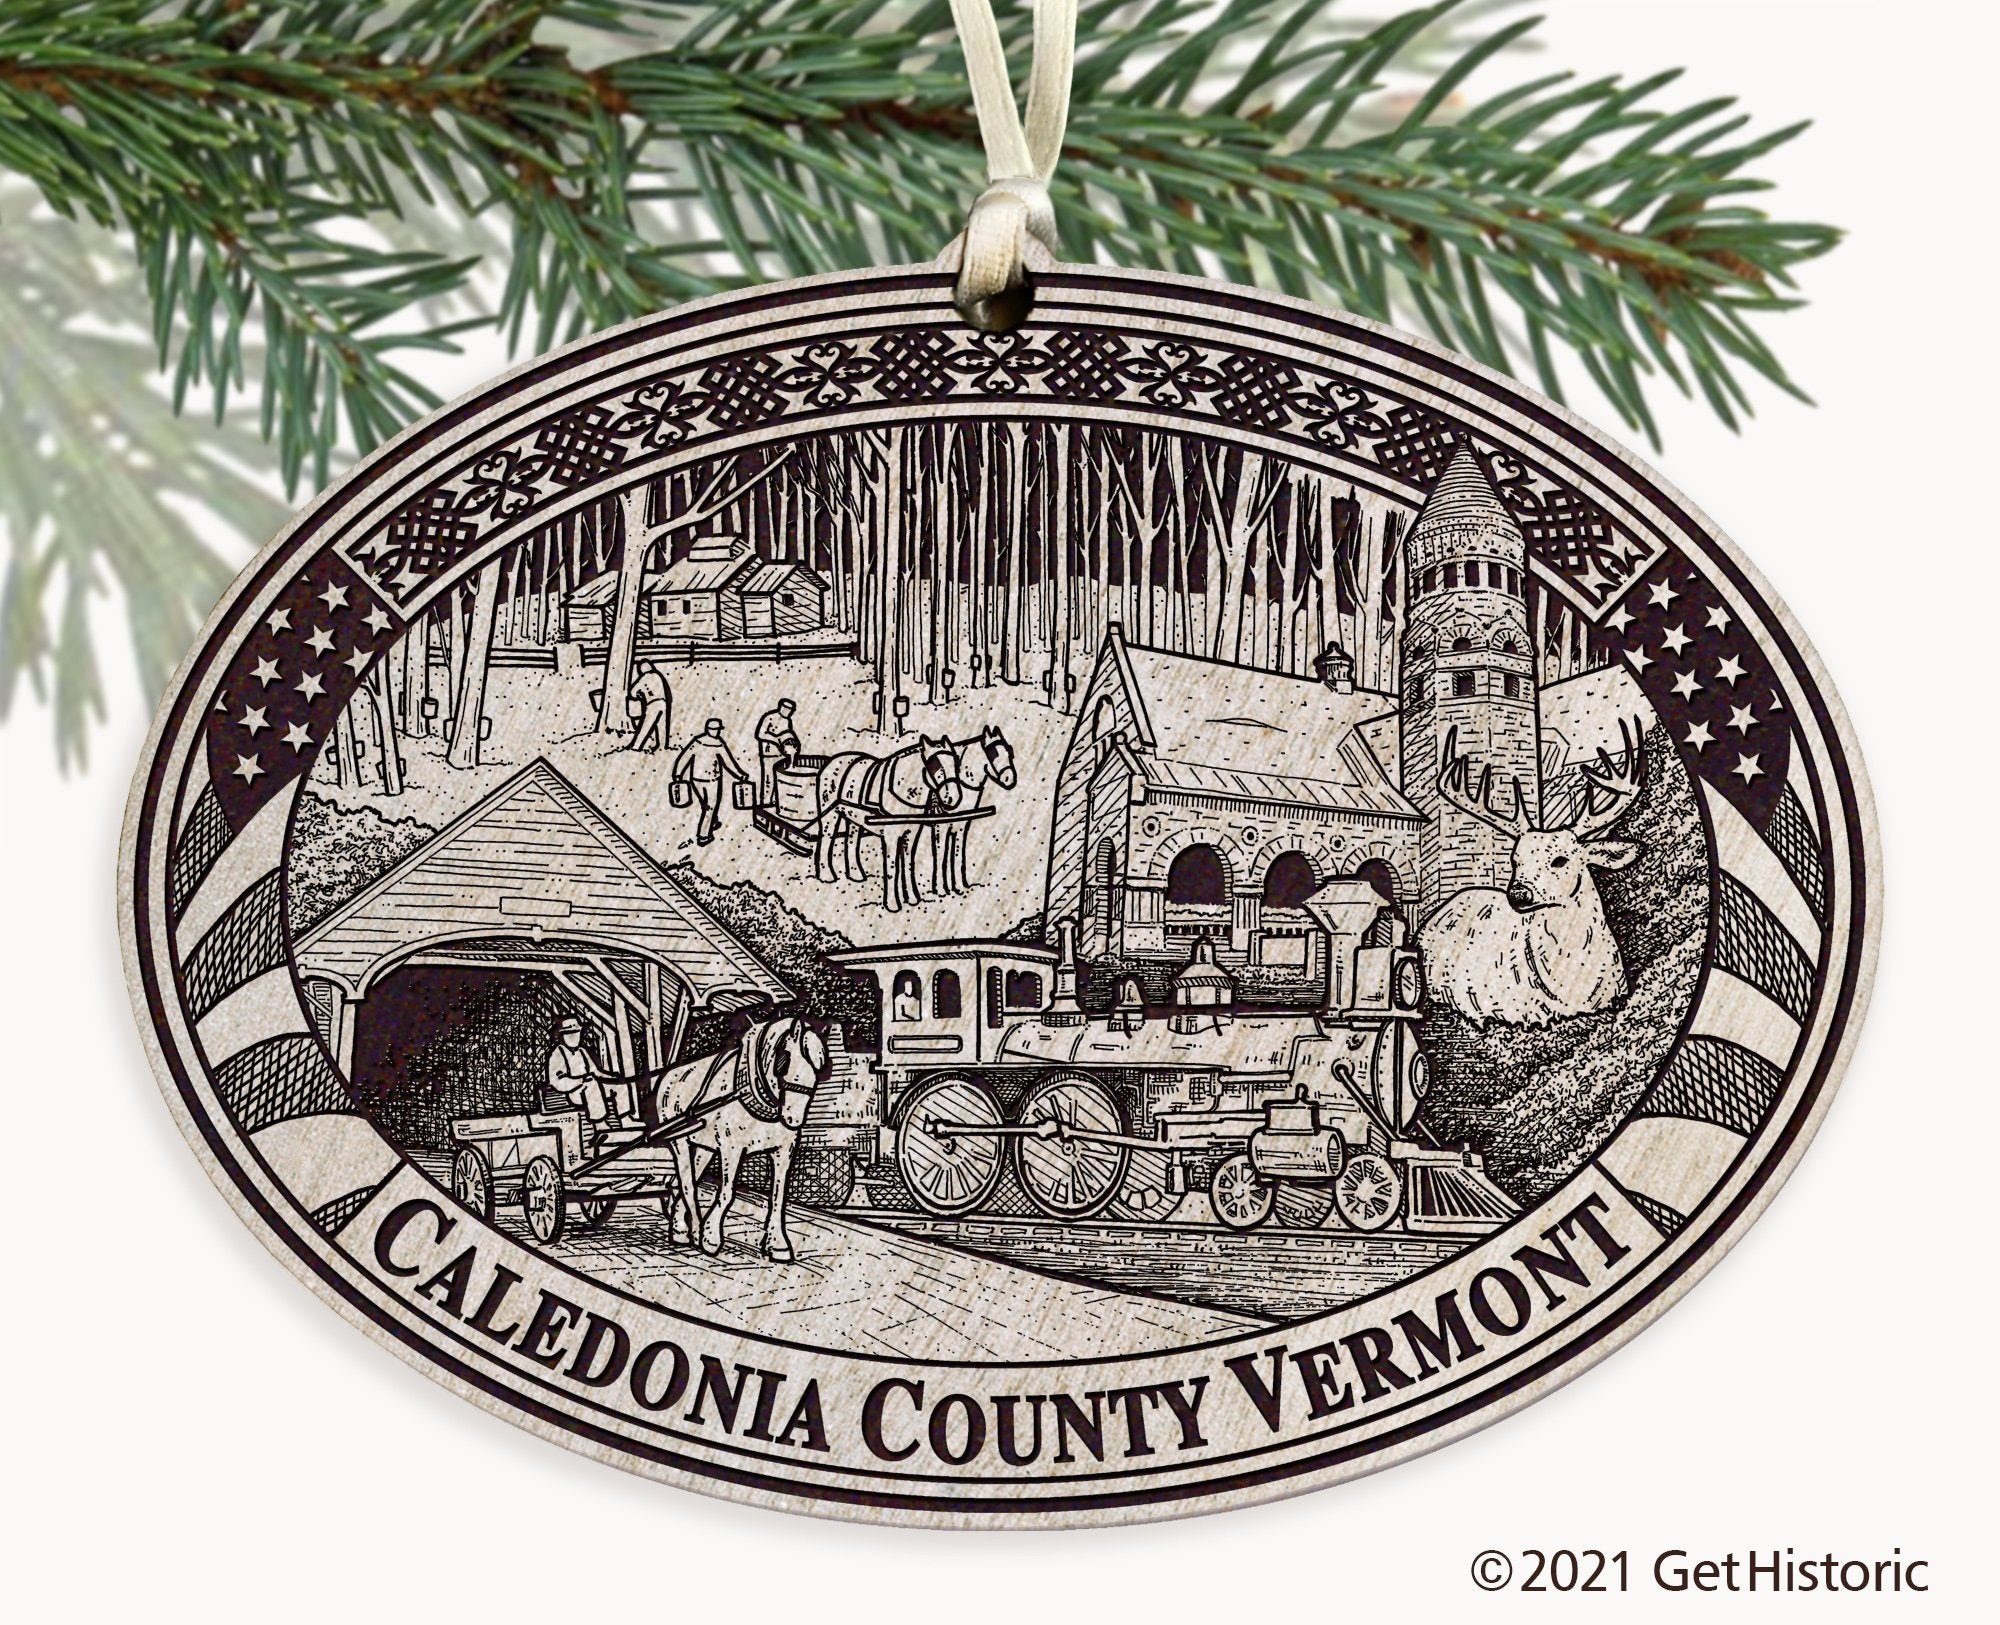 Caledonia County Vermont Engraved Ornament